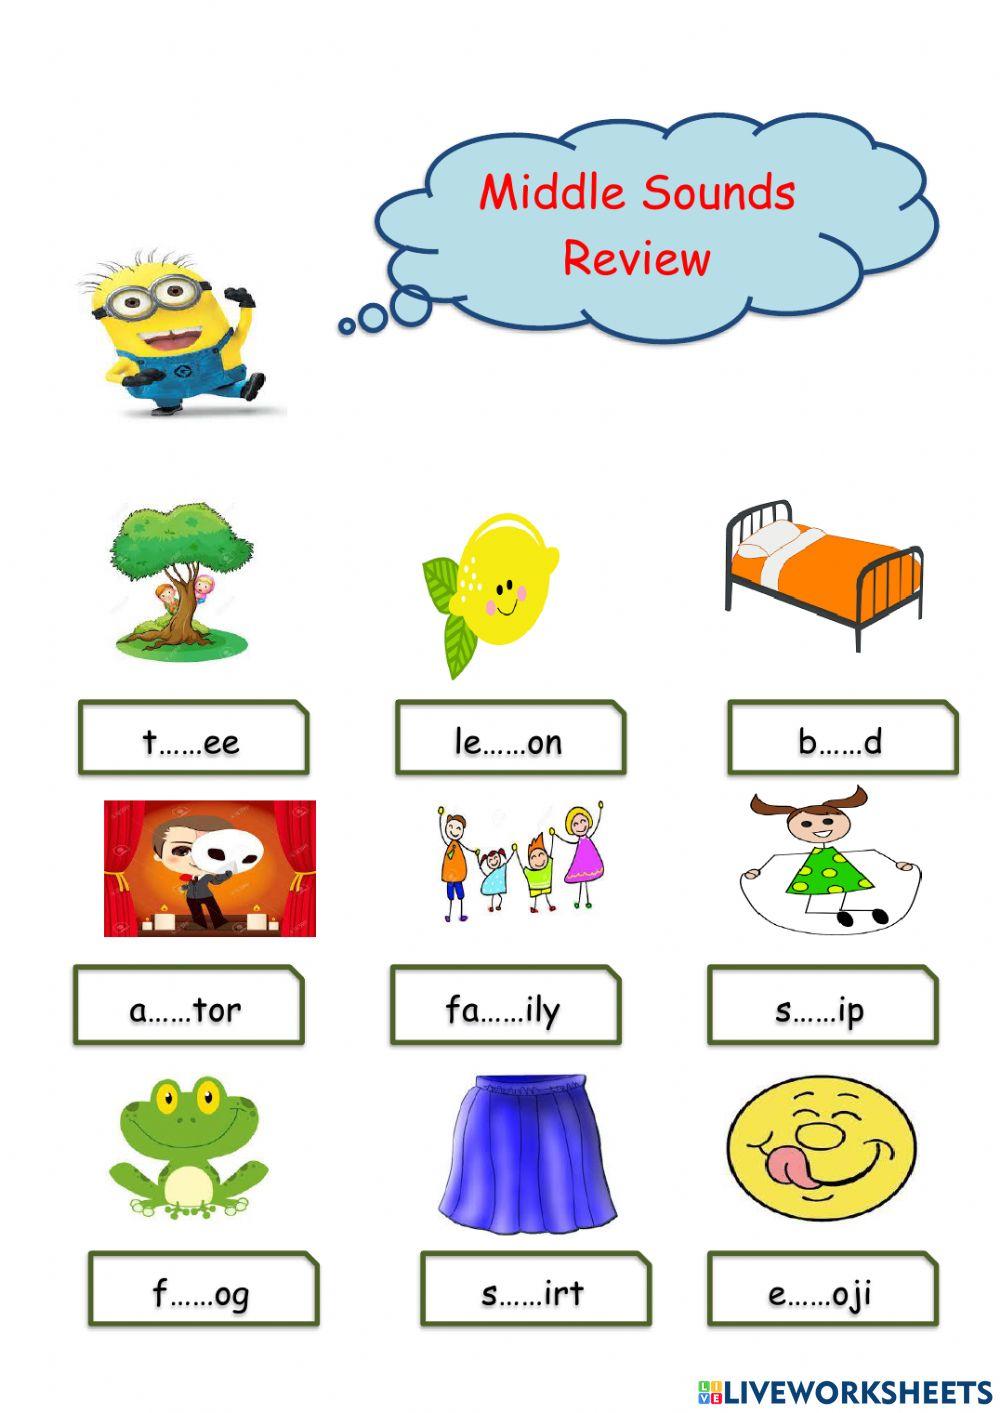 Sounds review group 2